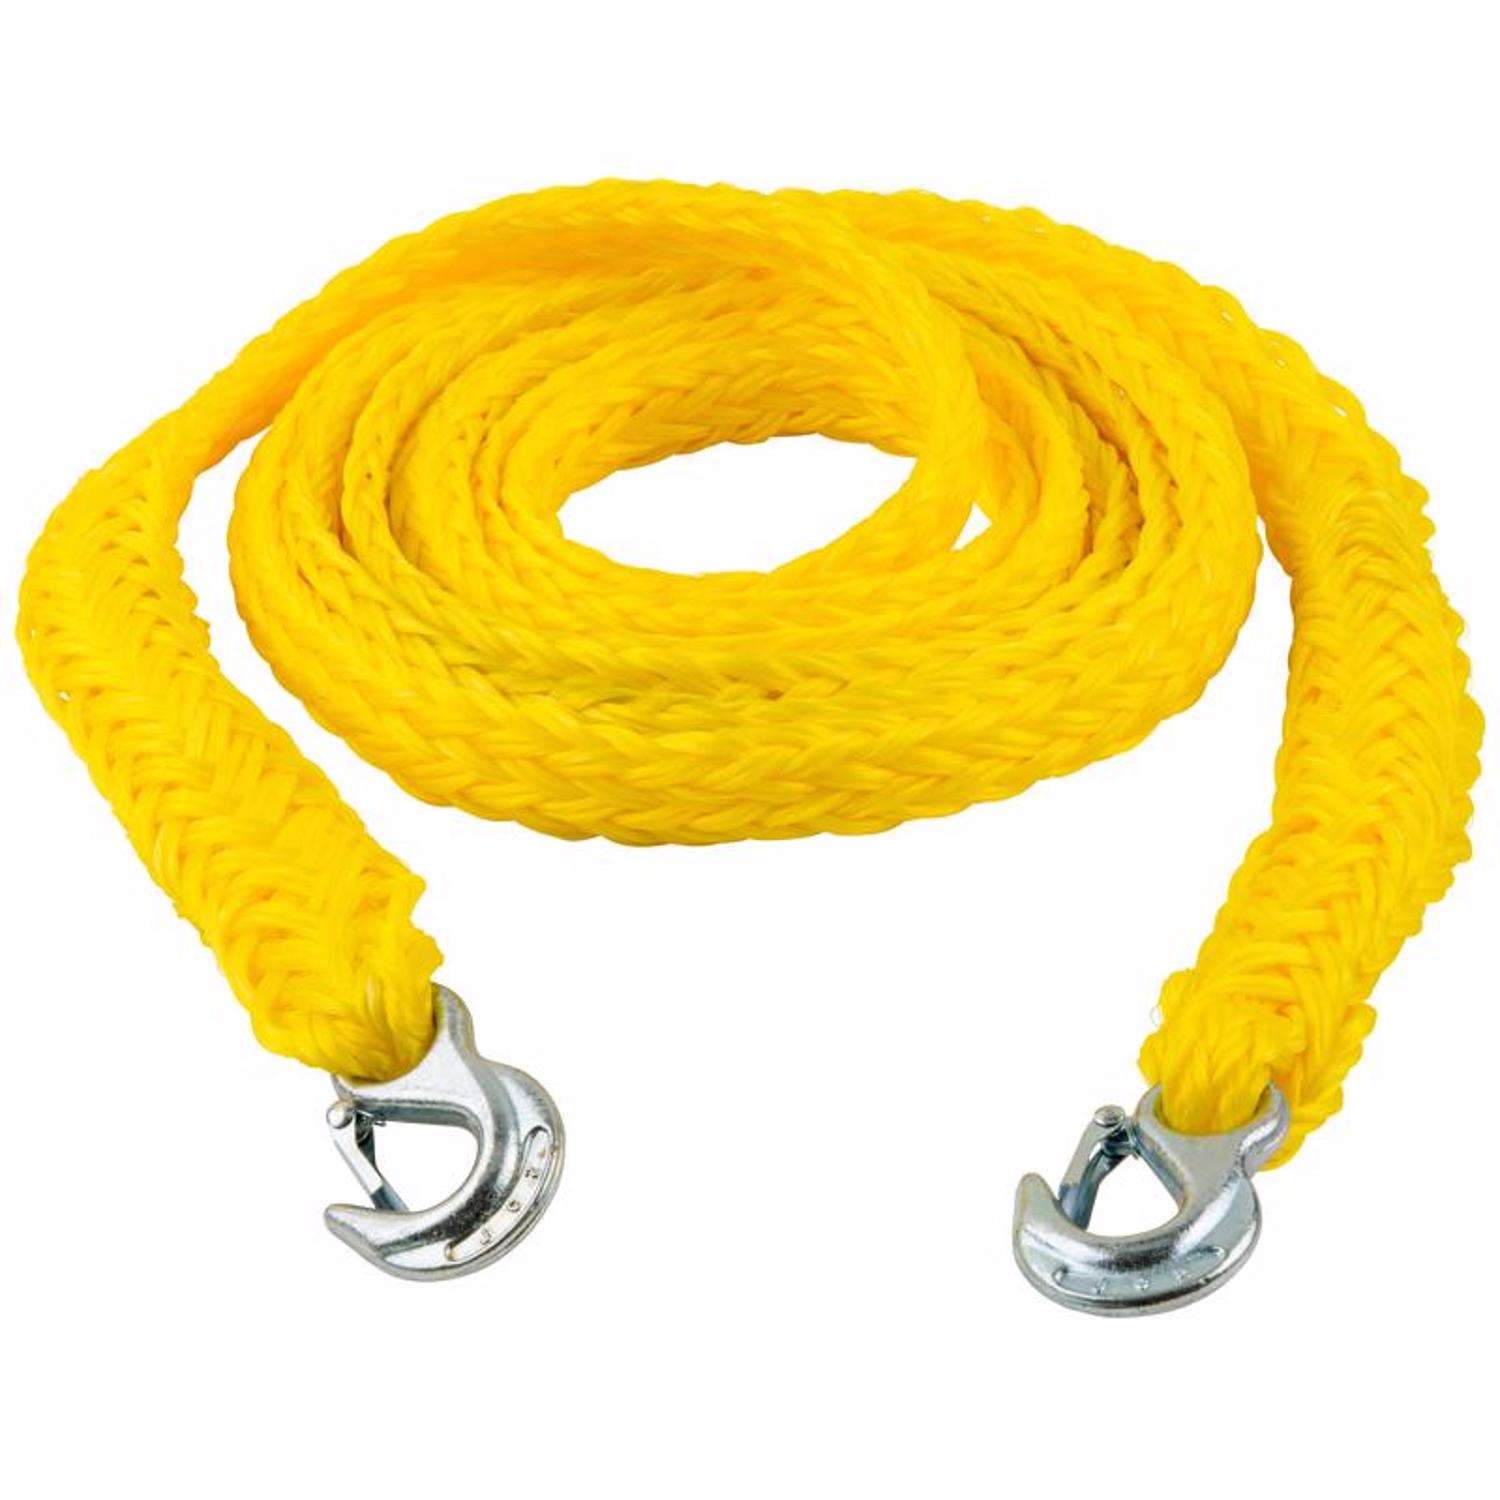 13 ft. Yellow Emergency Tow Ropes 